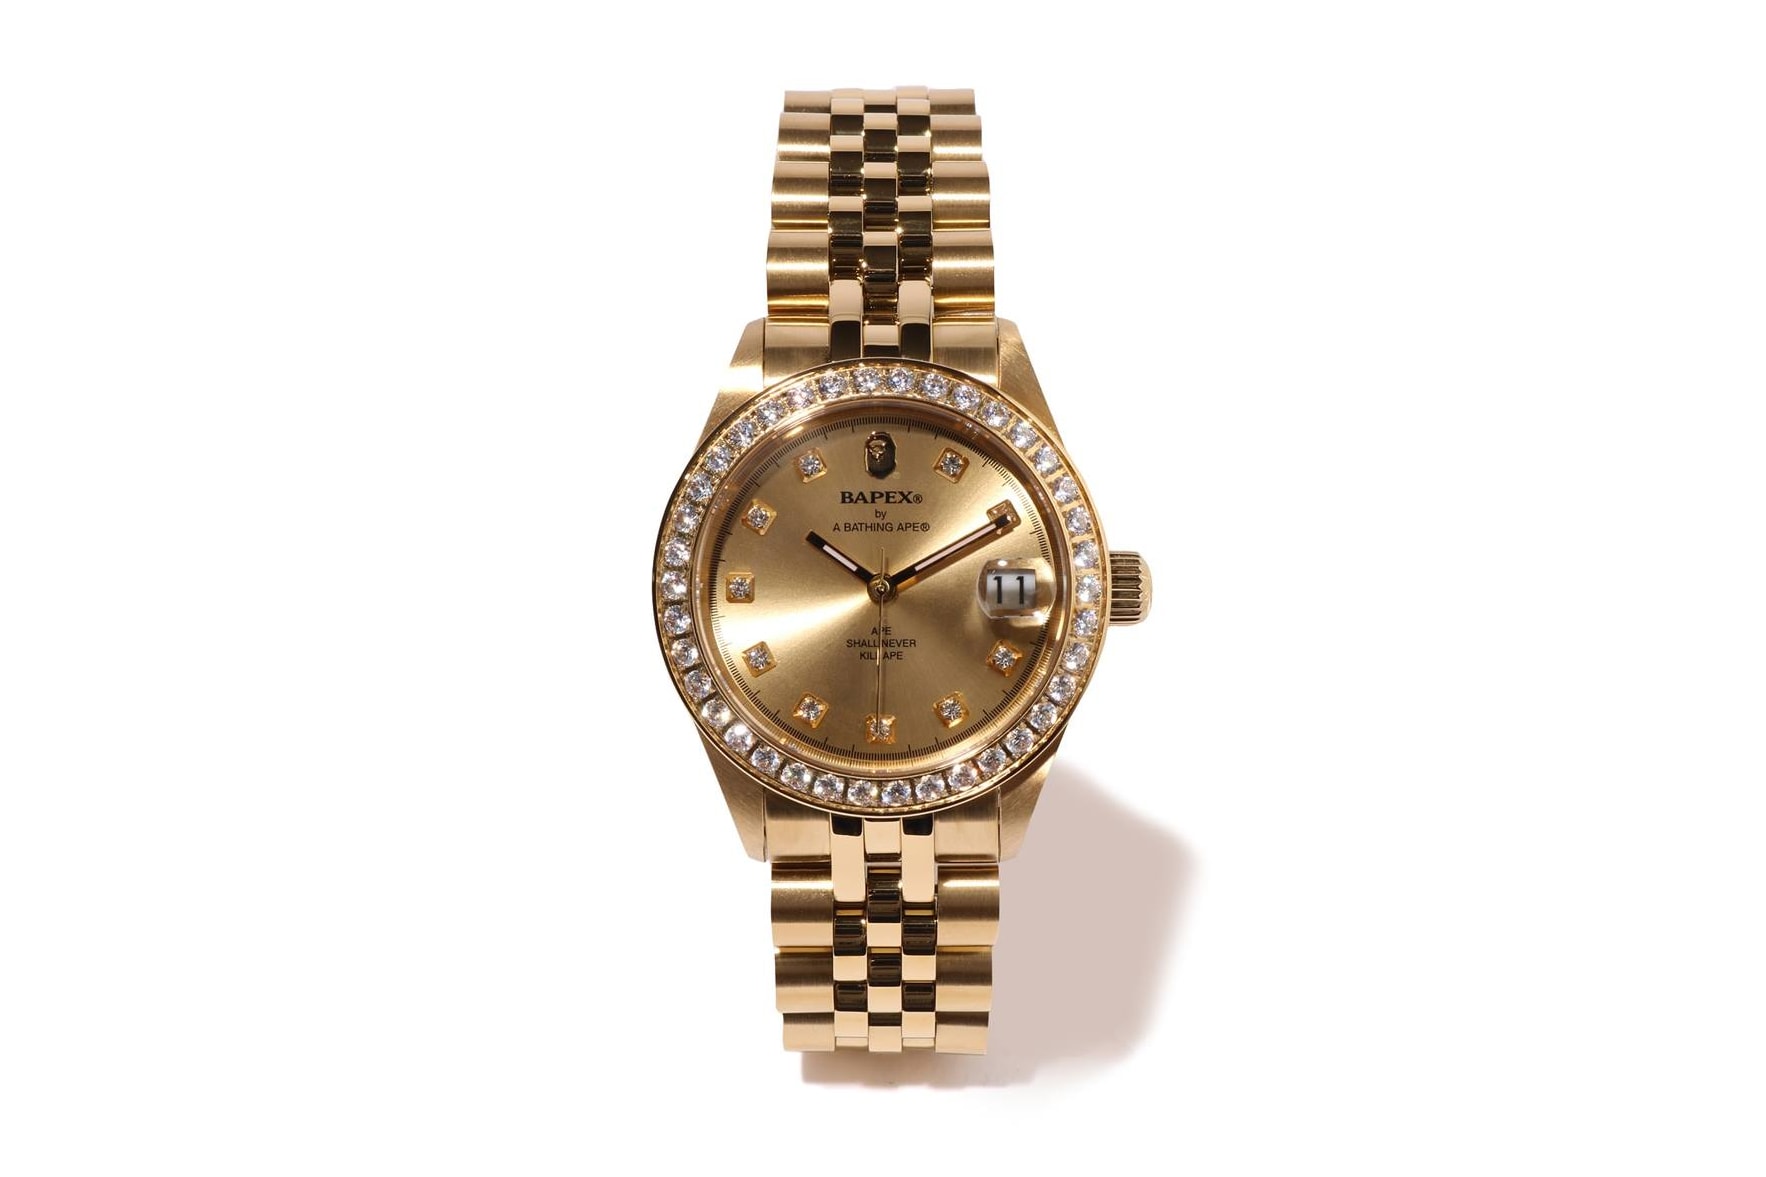 BAPE Type 1 BAPEX "Gold" Limited Edition Release a bathing ape timepieces ice diamonds watches ape head accessories